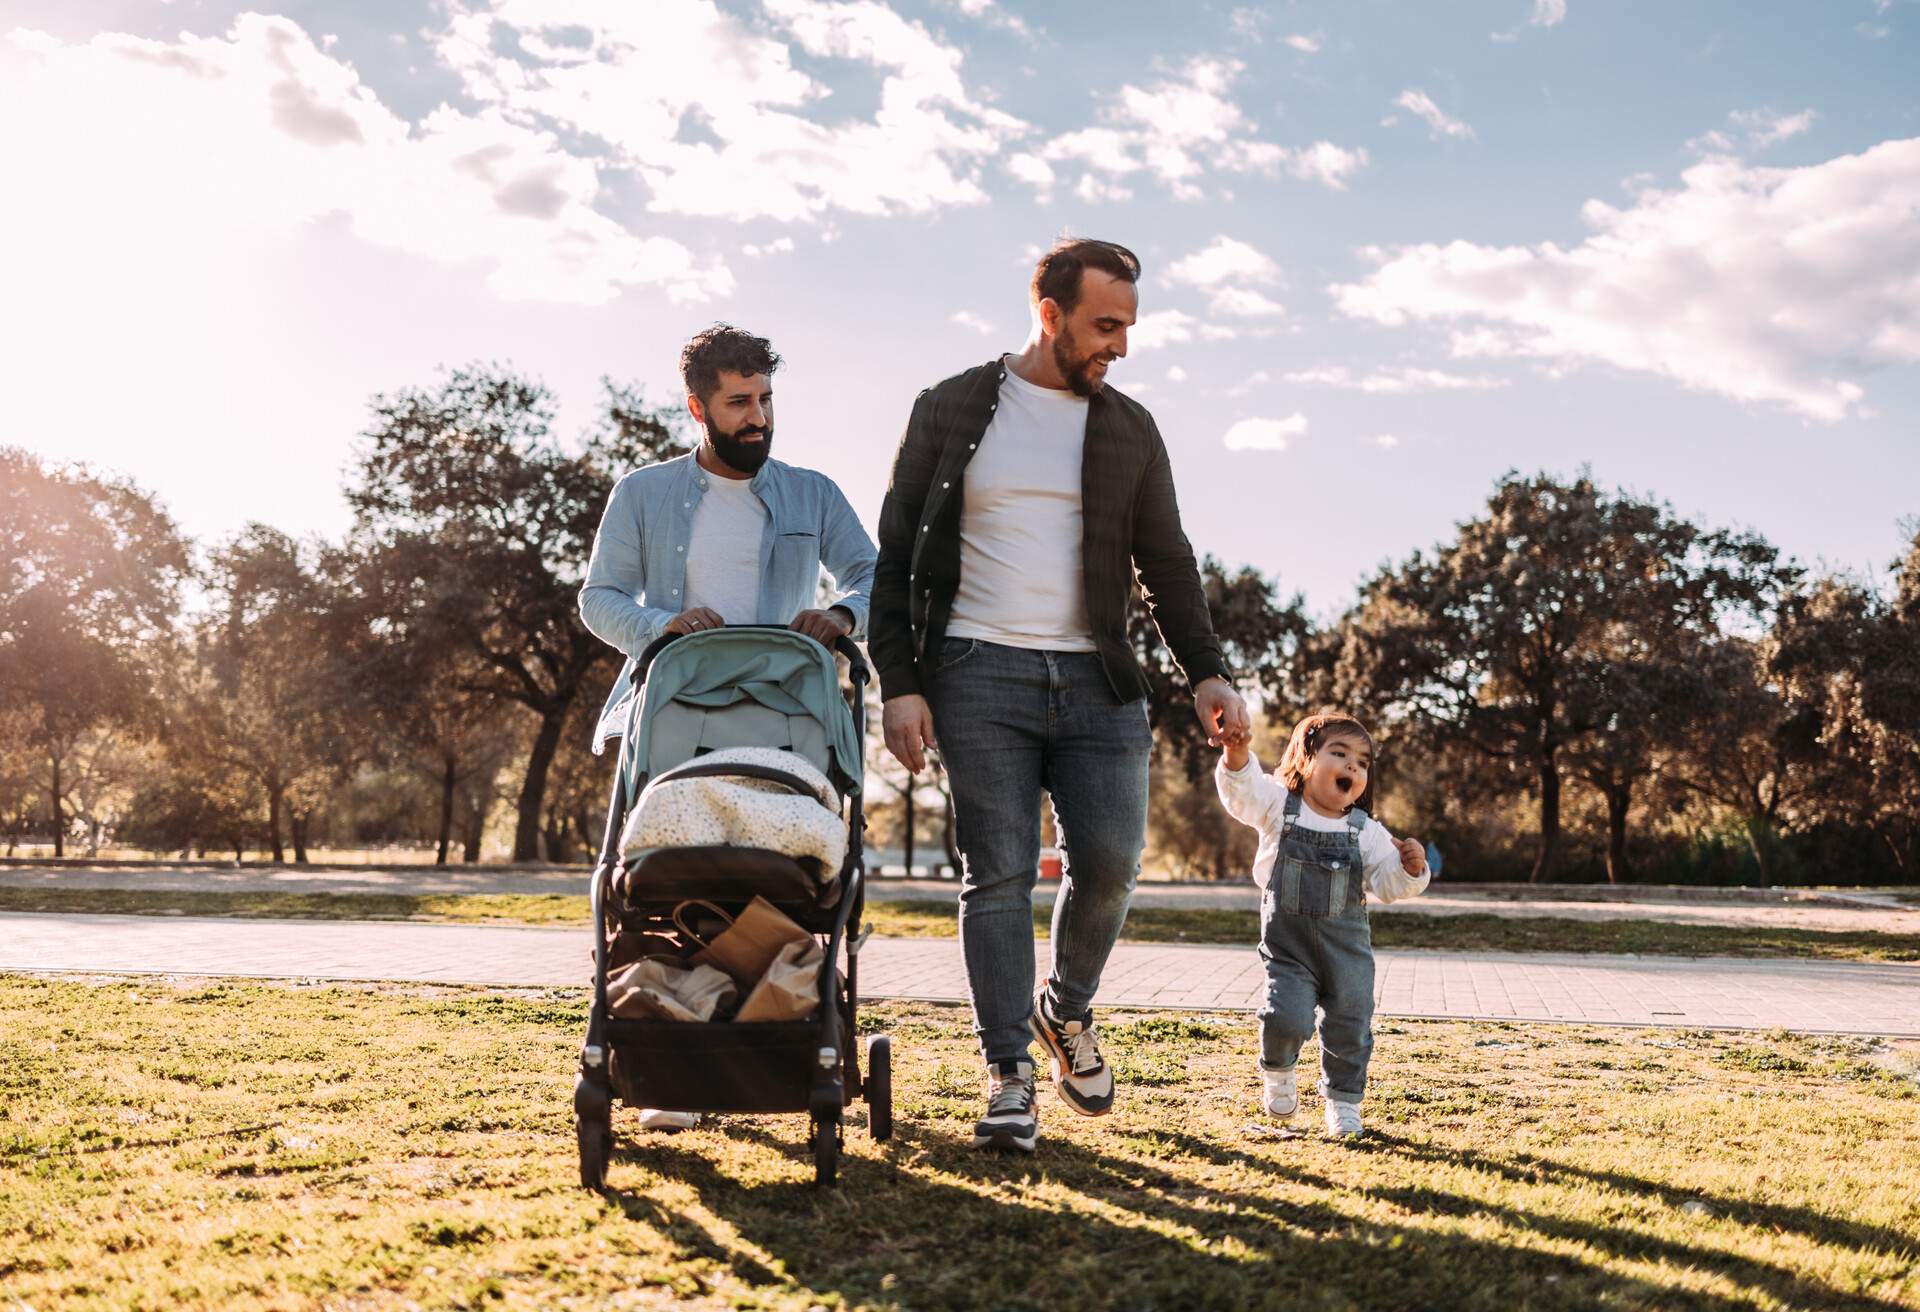 Gay fathers and their young daughter walking in the park. One of them is pushing the pram and the other is holding the small child's hand.